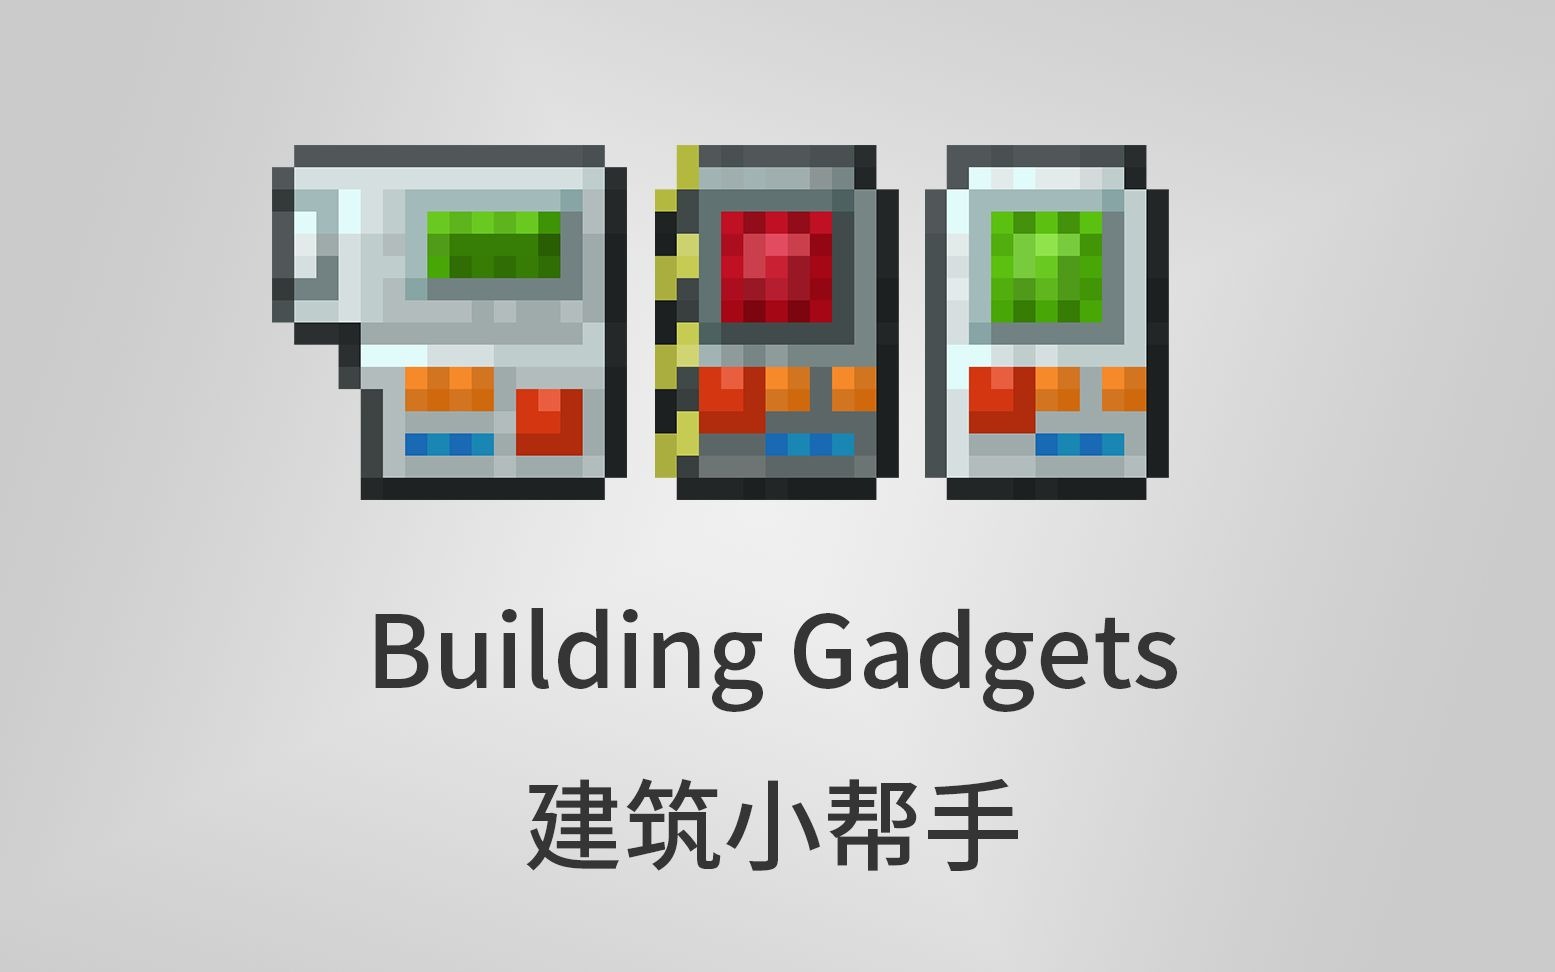 How Does Building Gadgets Work